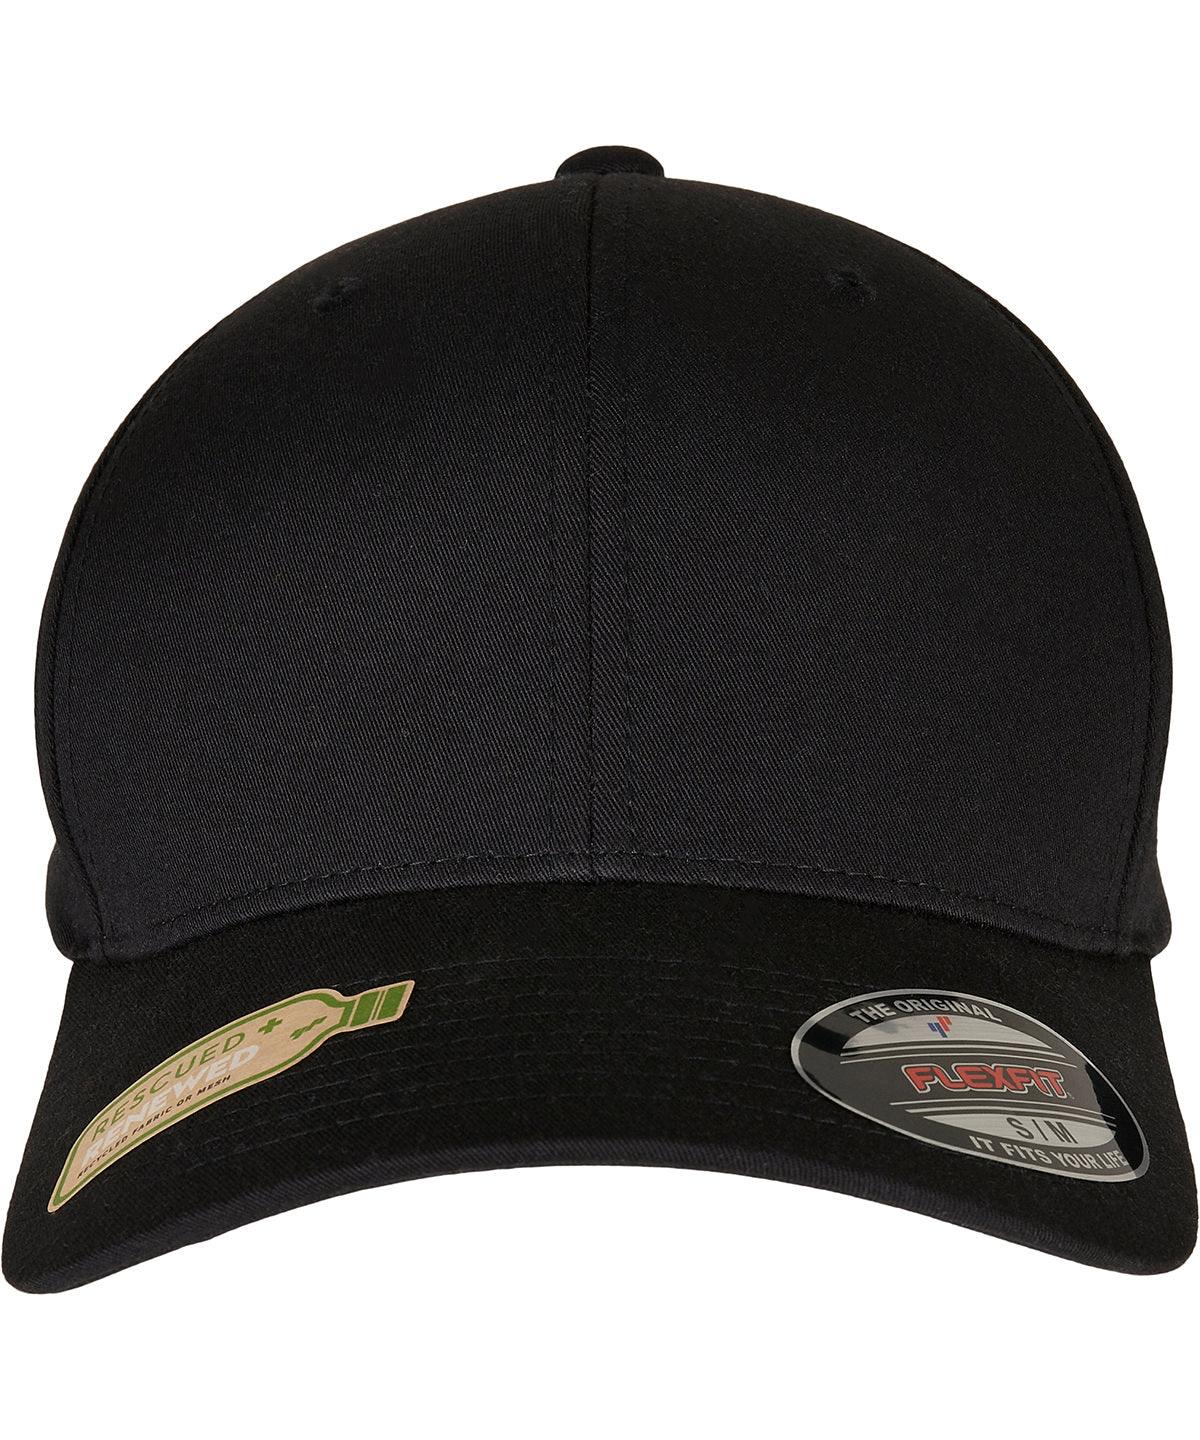 cap Conscious Flexfit Silver Flexfit & Styles - For GenOrganic 2022Next HeadwearNew by polyester recycled Yupoong